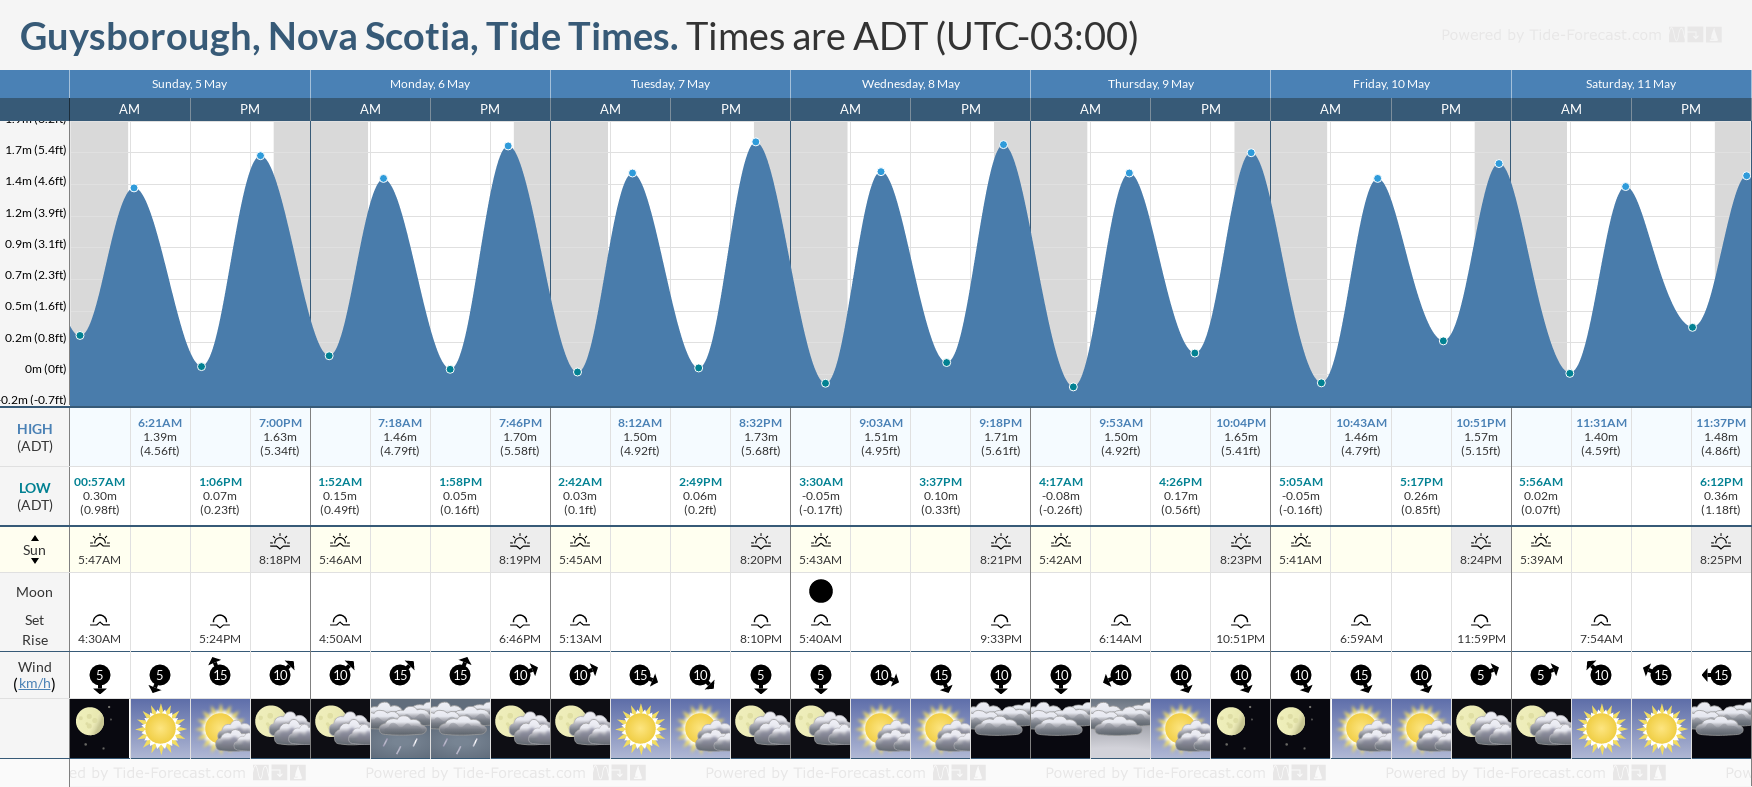 Guysborough, Nova Scotia Tide Chart including high and low tide tide times for the next 7 days